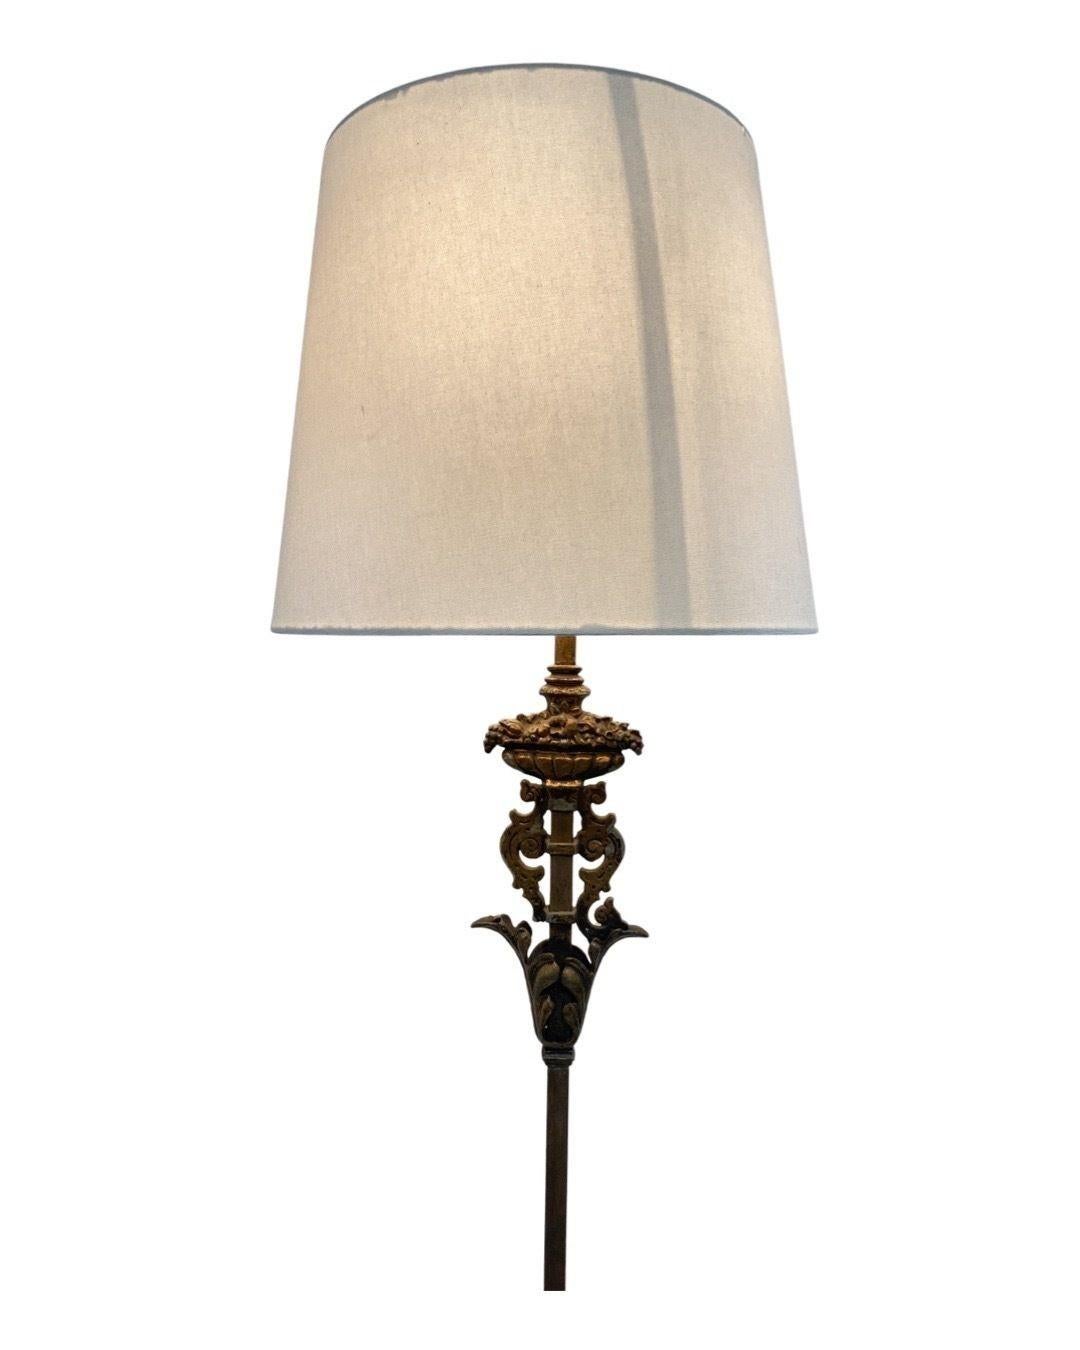 Rembrandt cast iron torchiere floor lamp with circular base and elegant floral wrought iron details.